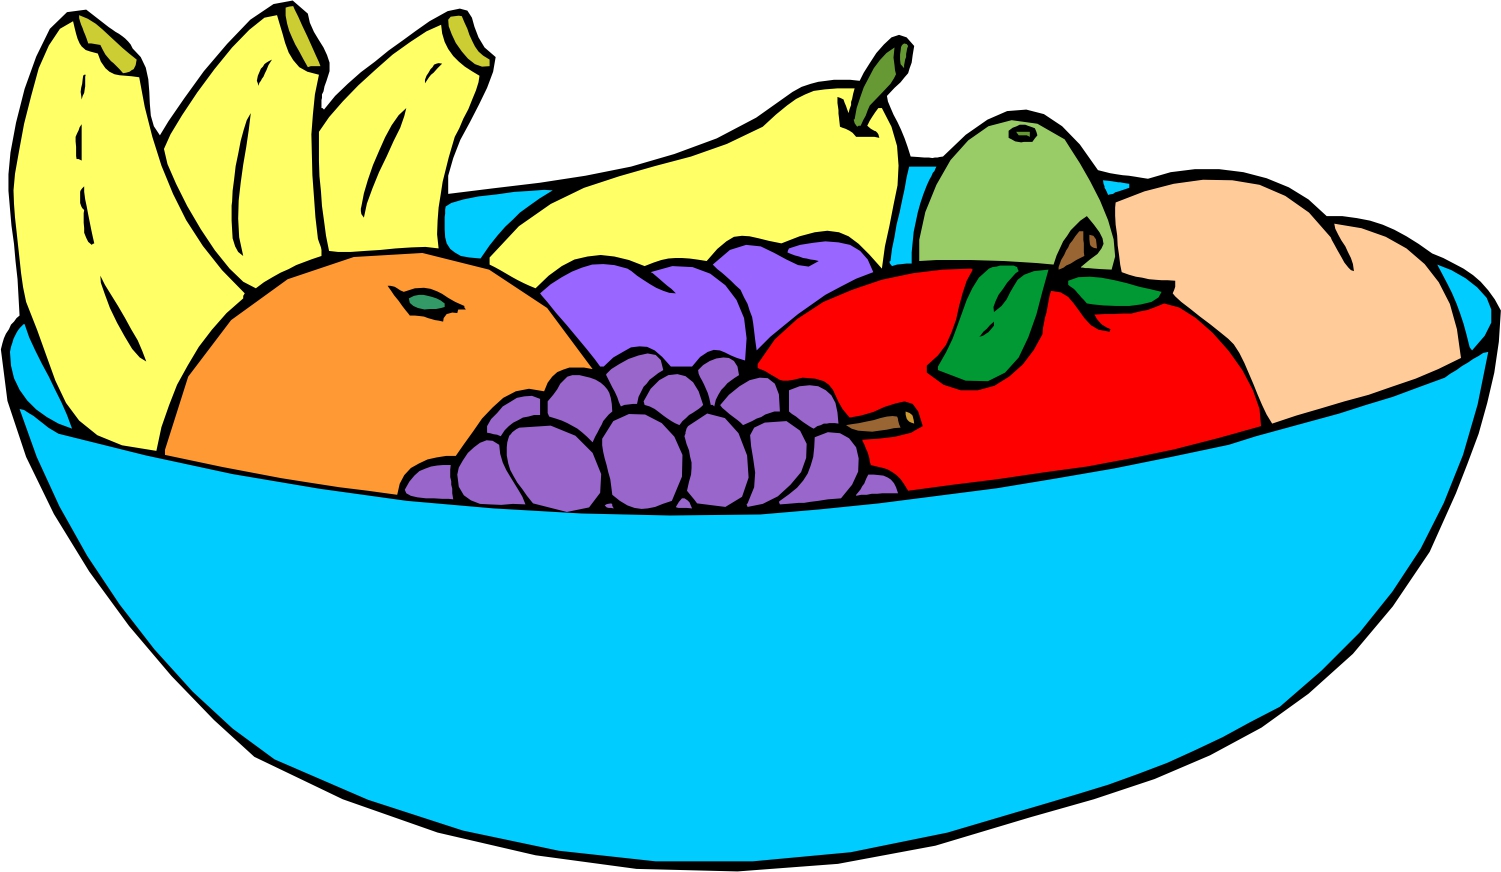 Free Fruit Cartoon Cliparts, Download Free Fruit Cartoon Cliparts png